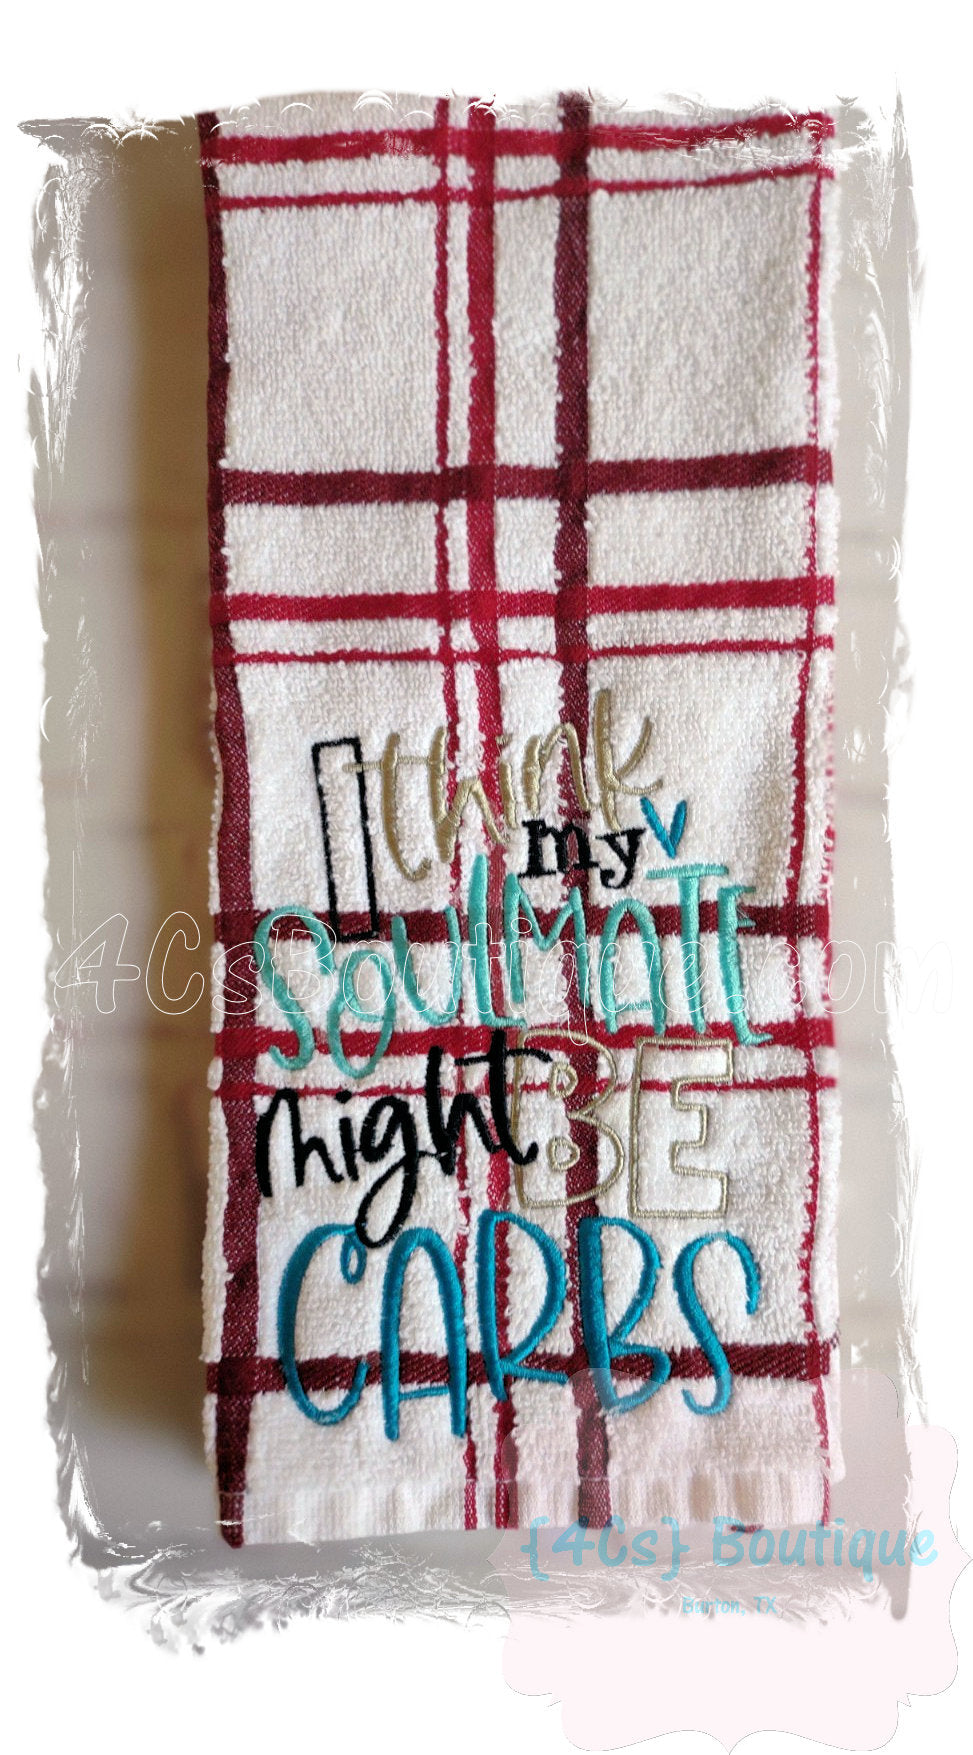 I Think My Soulmate Might Be Carbs Hand Towel